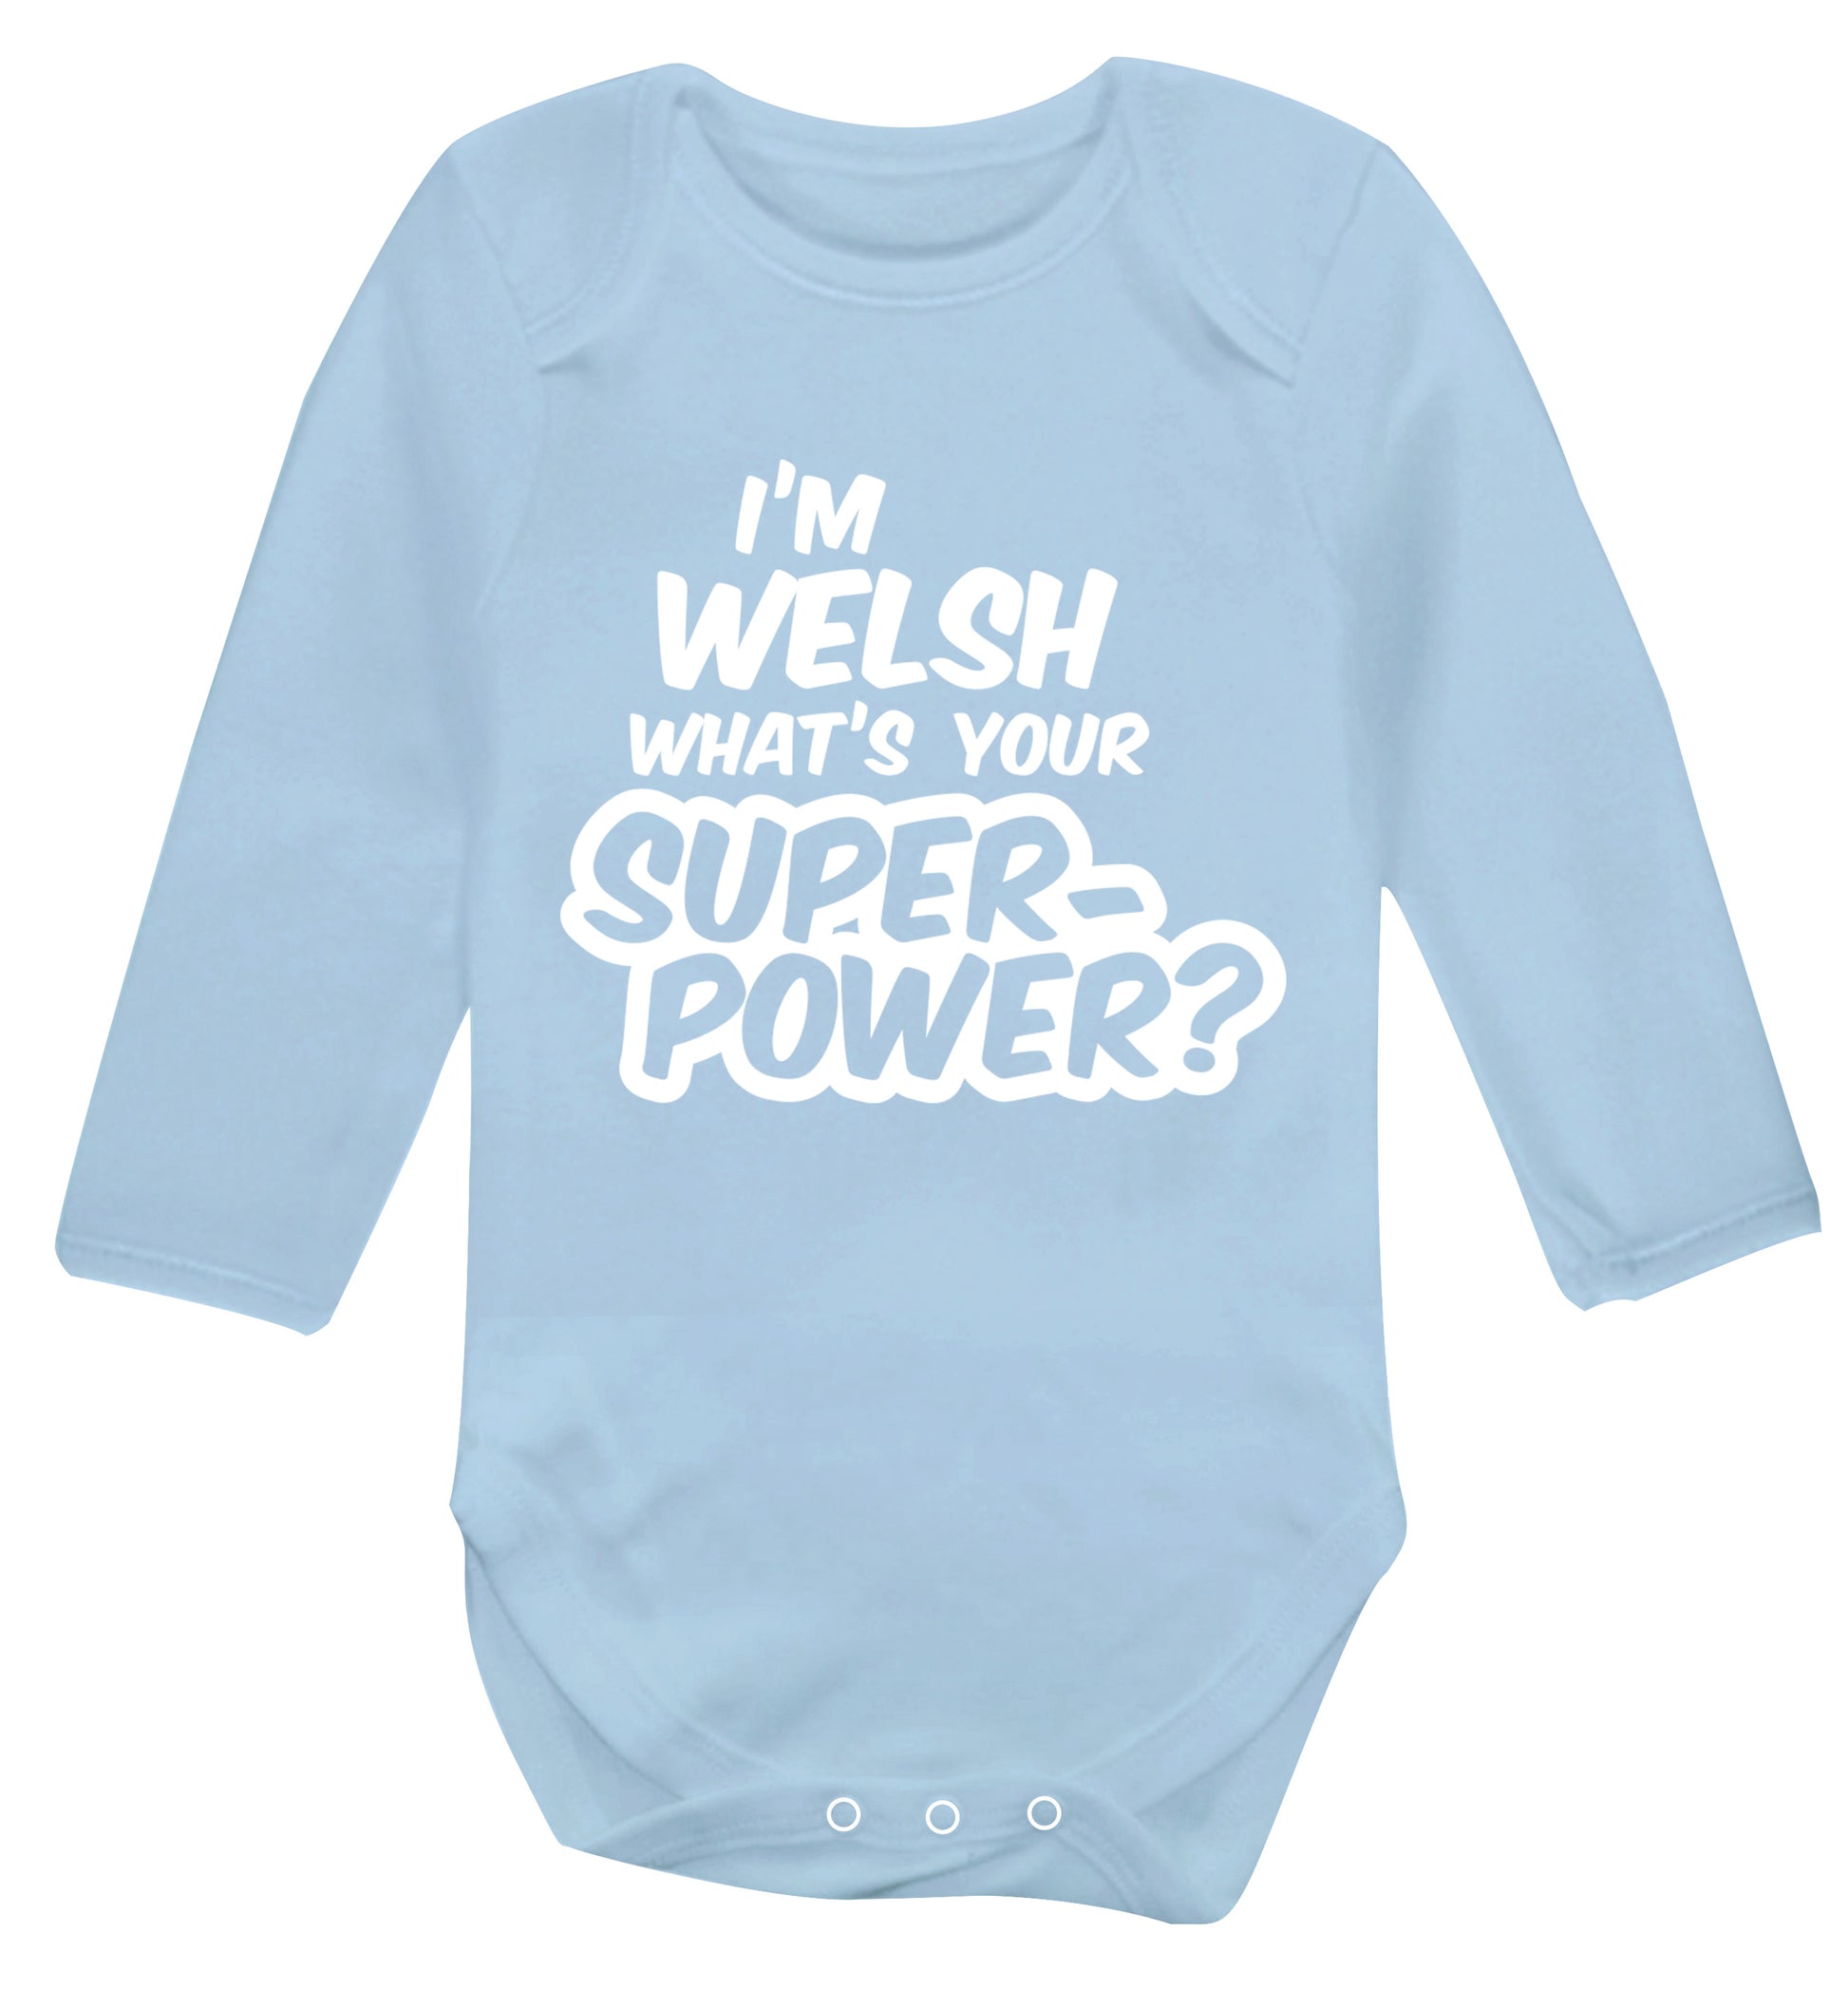 I'm Welsh what's your superpower? Baby Vest long sleeved pale blue 6-12 months